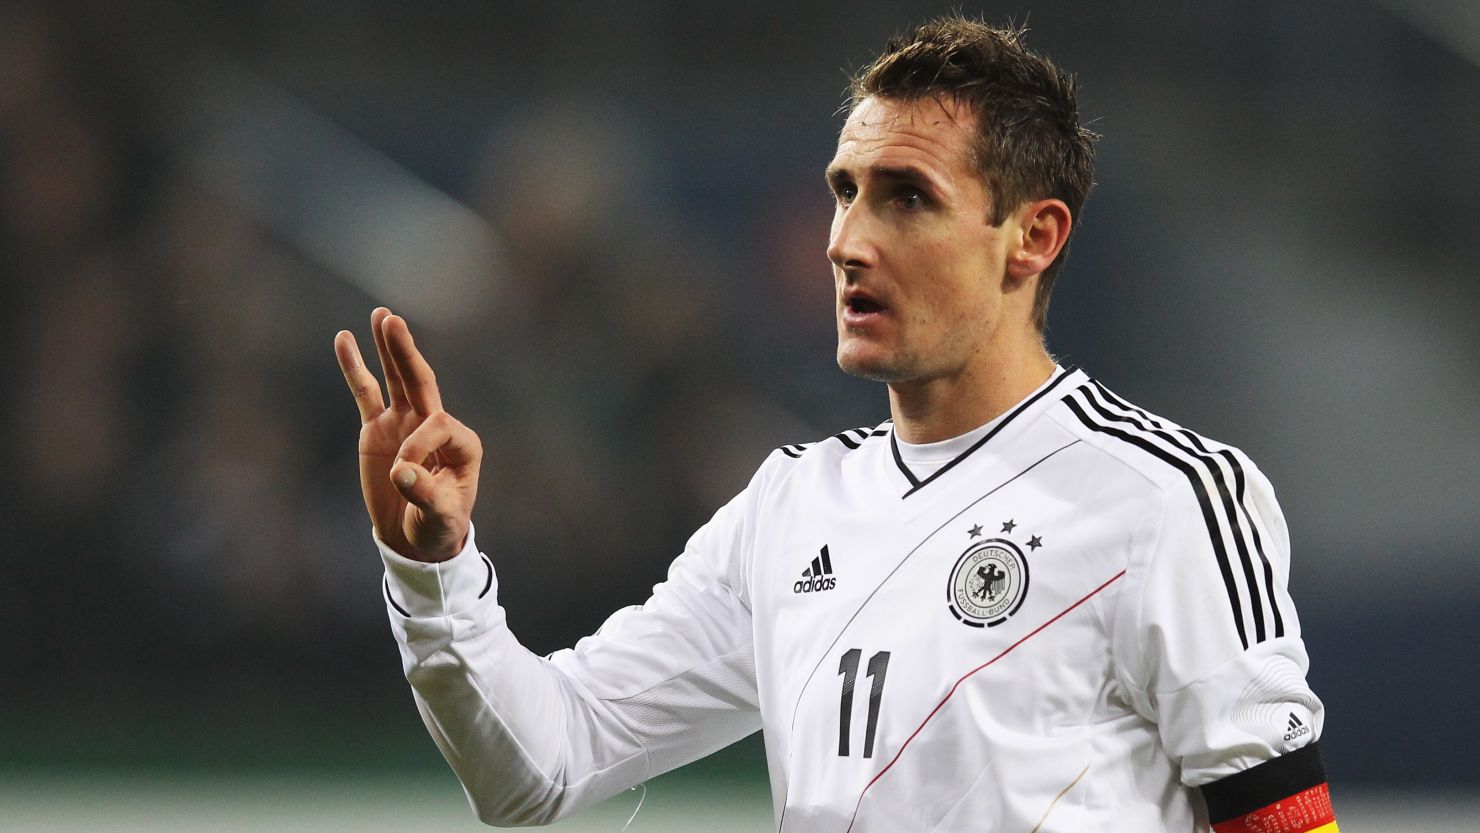 Miroslav Klose celebrates his goal in the 3-0 rout of the Netherlands in Hamburg